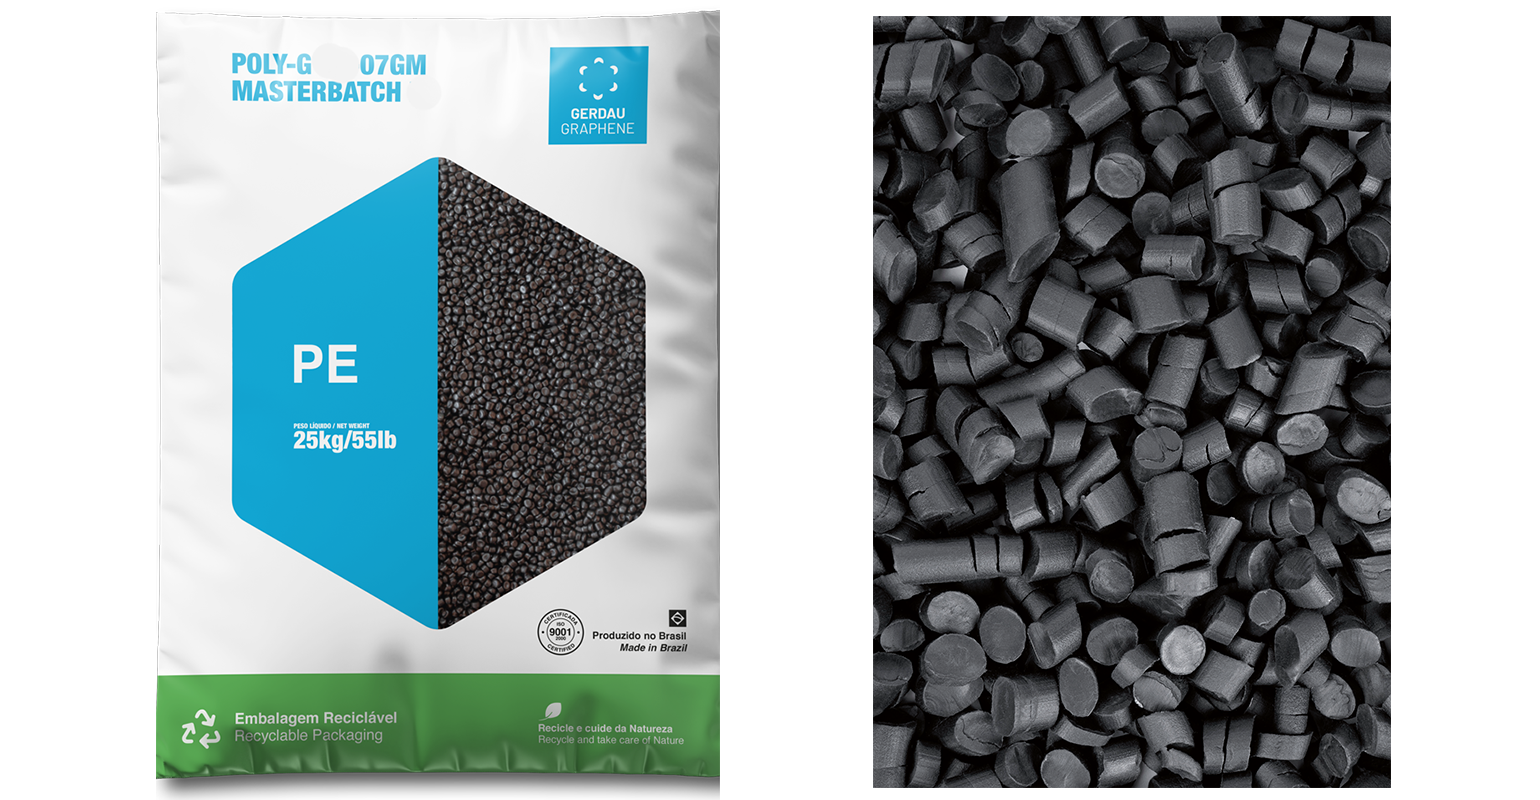 Activated Carbon Pellets, For Industrial, Packaging Type: Hdpe Bag